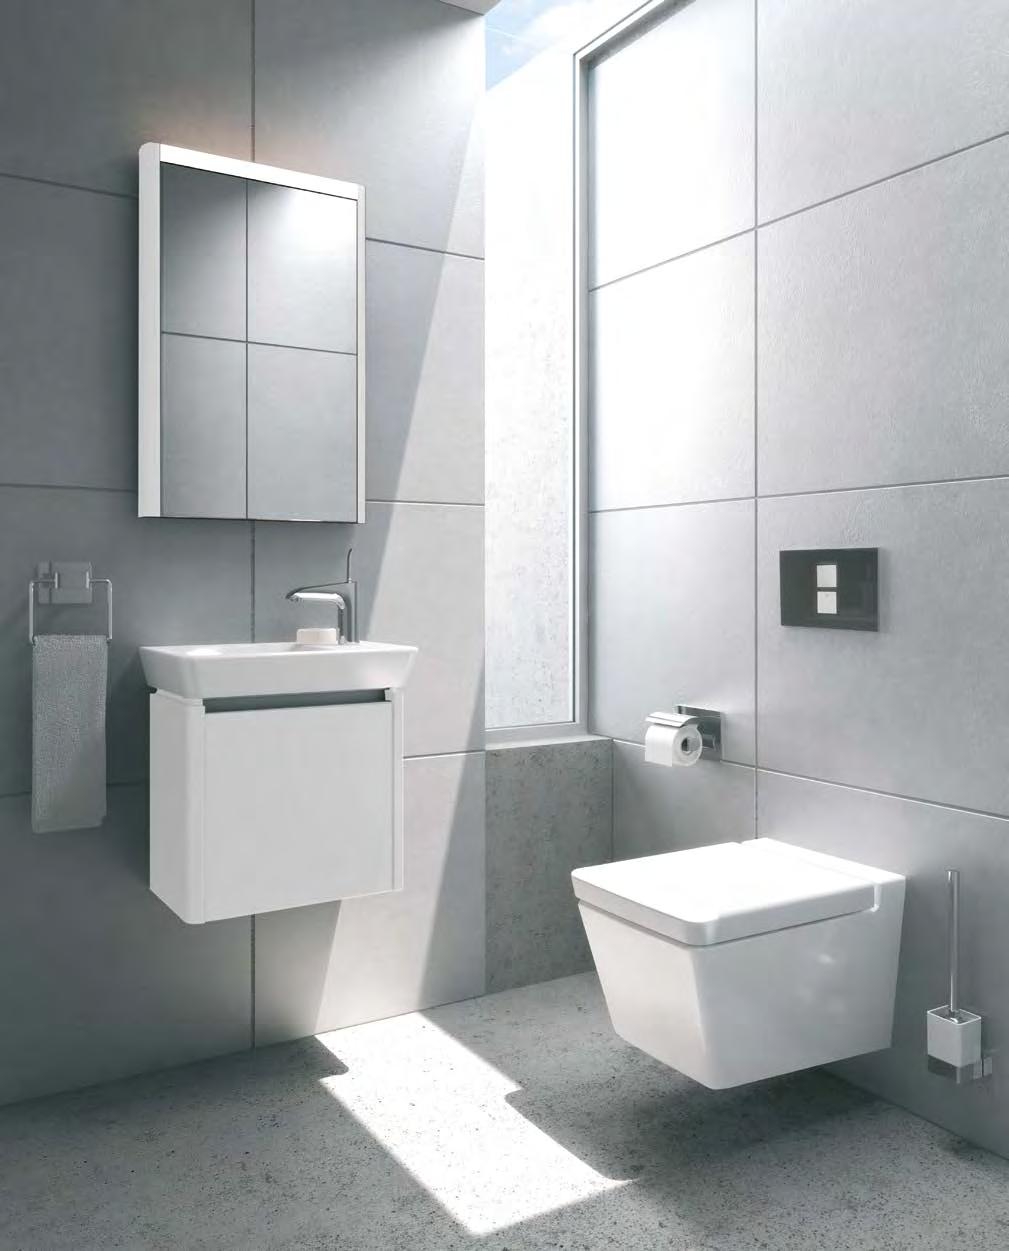 T4 SPECIALLY-DESIGNED CLOAKROOM UNIT AND WASHBASIN USES AN OFFSET TAP TO MAXIMISE BASIN DEPTH T4 T4 4458 Washbasin, 50cm 135 56456 Cloakroom unit with door, right hand hinged, 50cm,